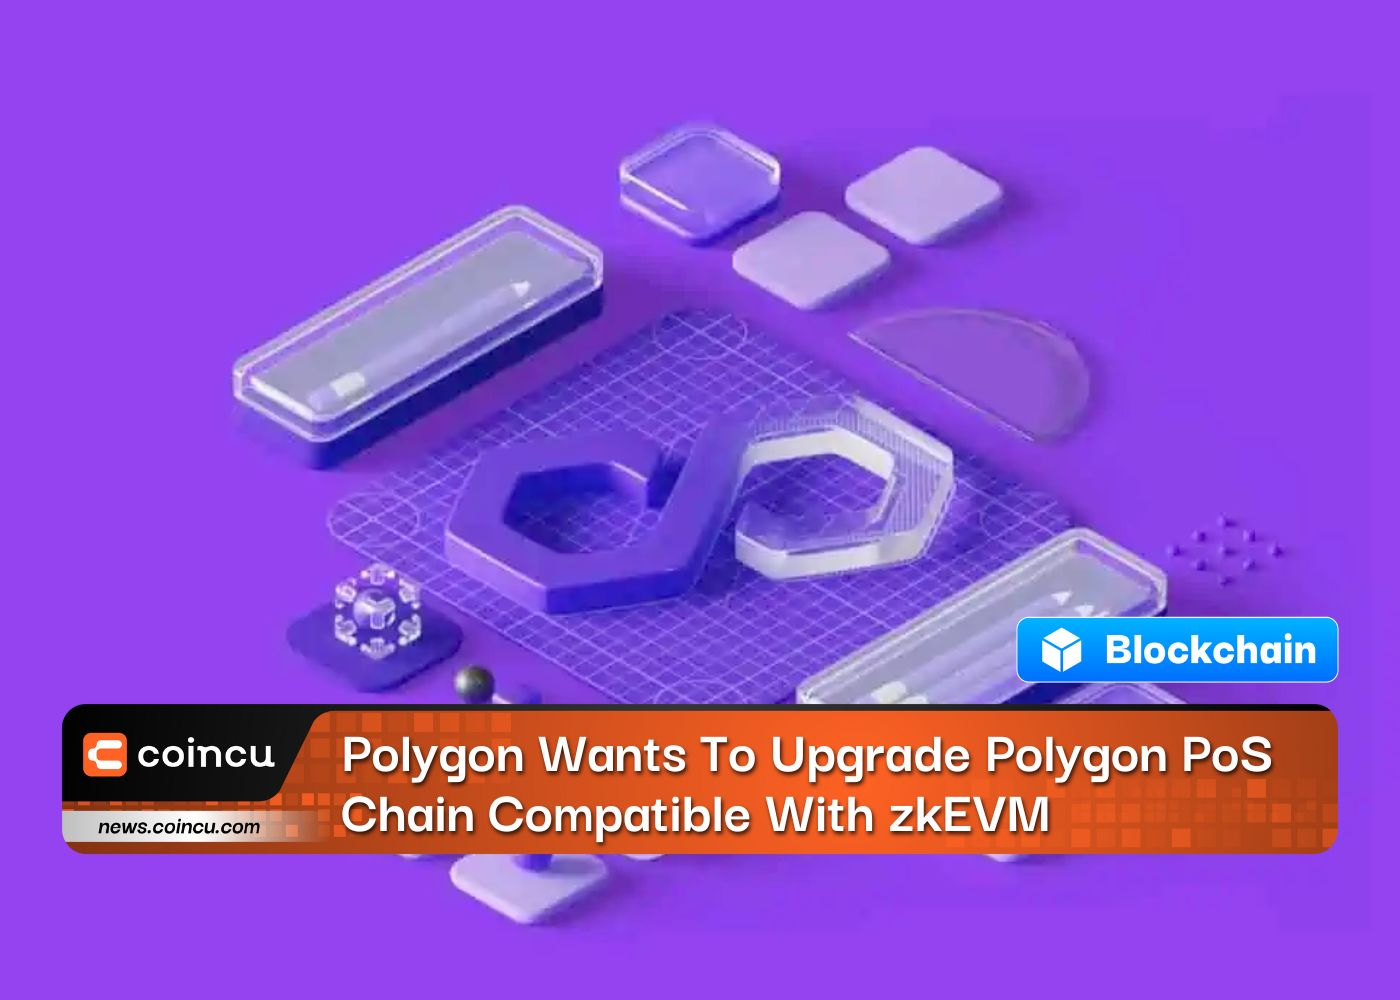 Caution: Layer 2 Polygon Wants To Upgrade Polygon PoS Chain Compatible With zkEVM